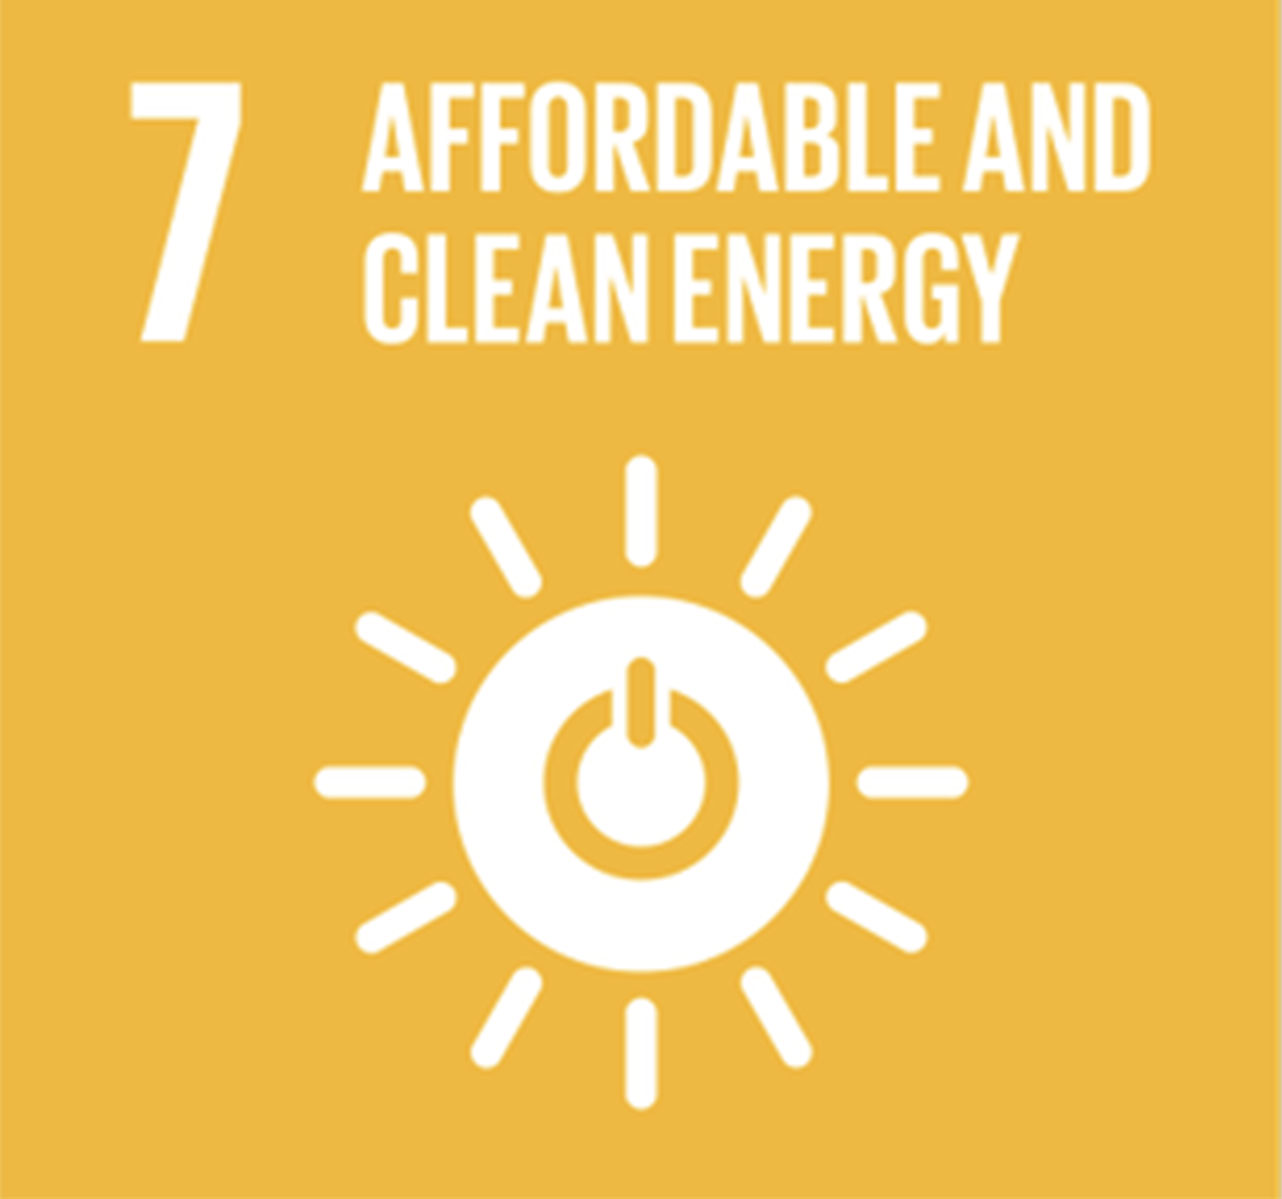 Affordable and Clean Energy - #7.jpg